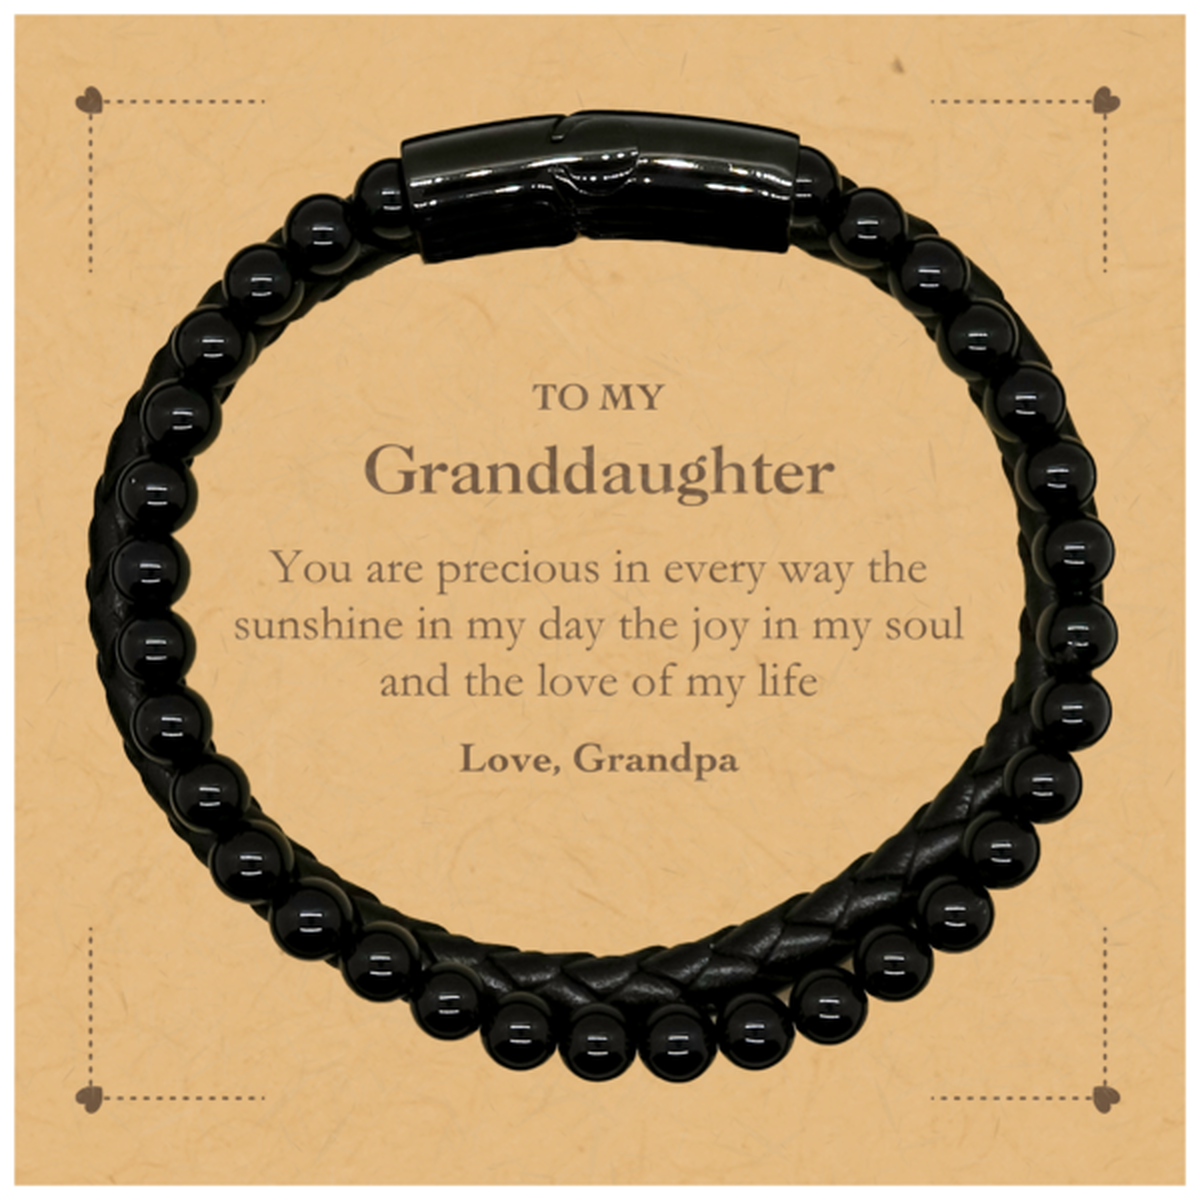 Graduation Gifts for Granddaughter Stone Leather Bracelets Present from Grandpa, Christmas Granddaughter Birthday Gifts Granddaughter You are precious in every way the sunshine in my day. Love, Grandpa